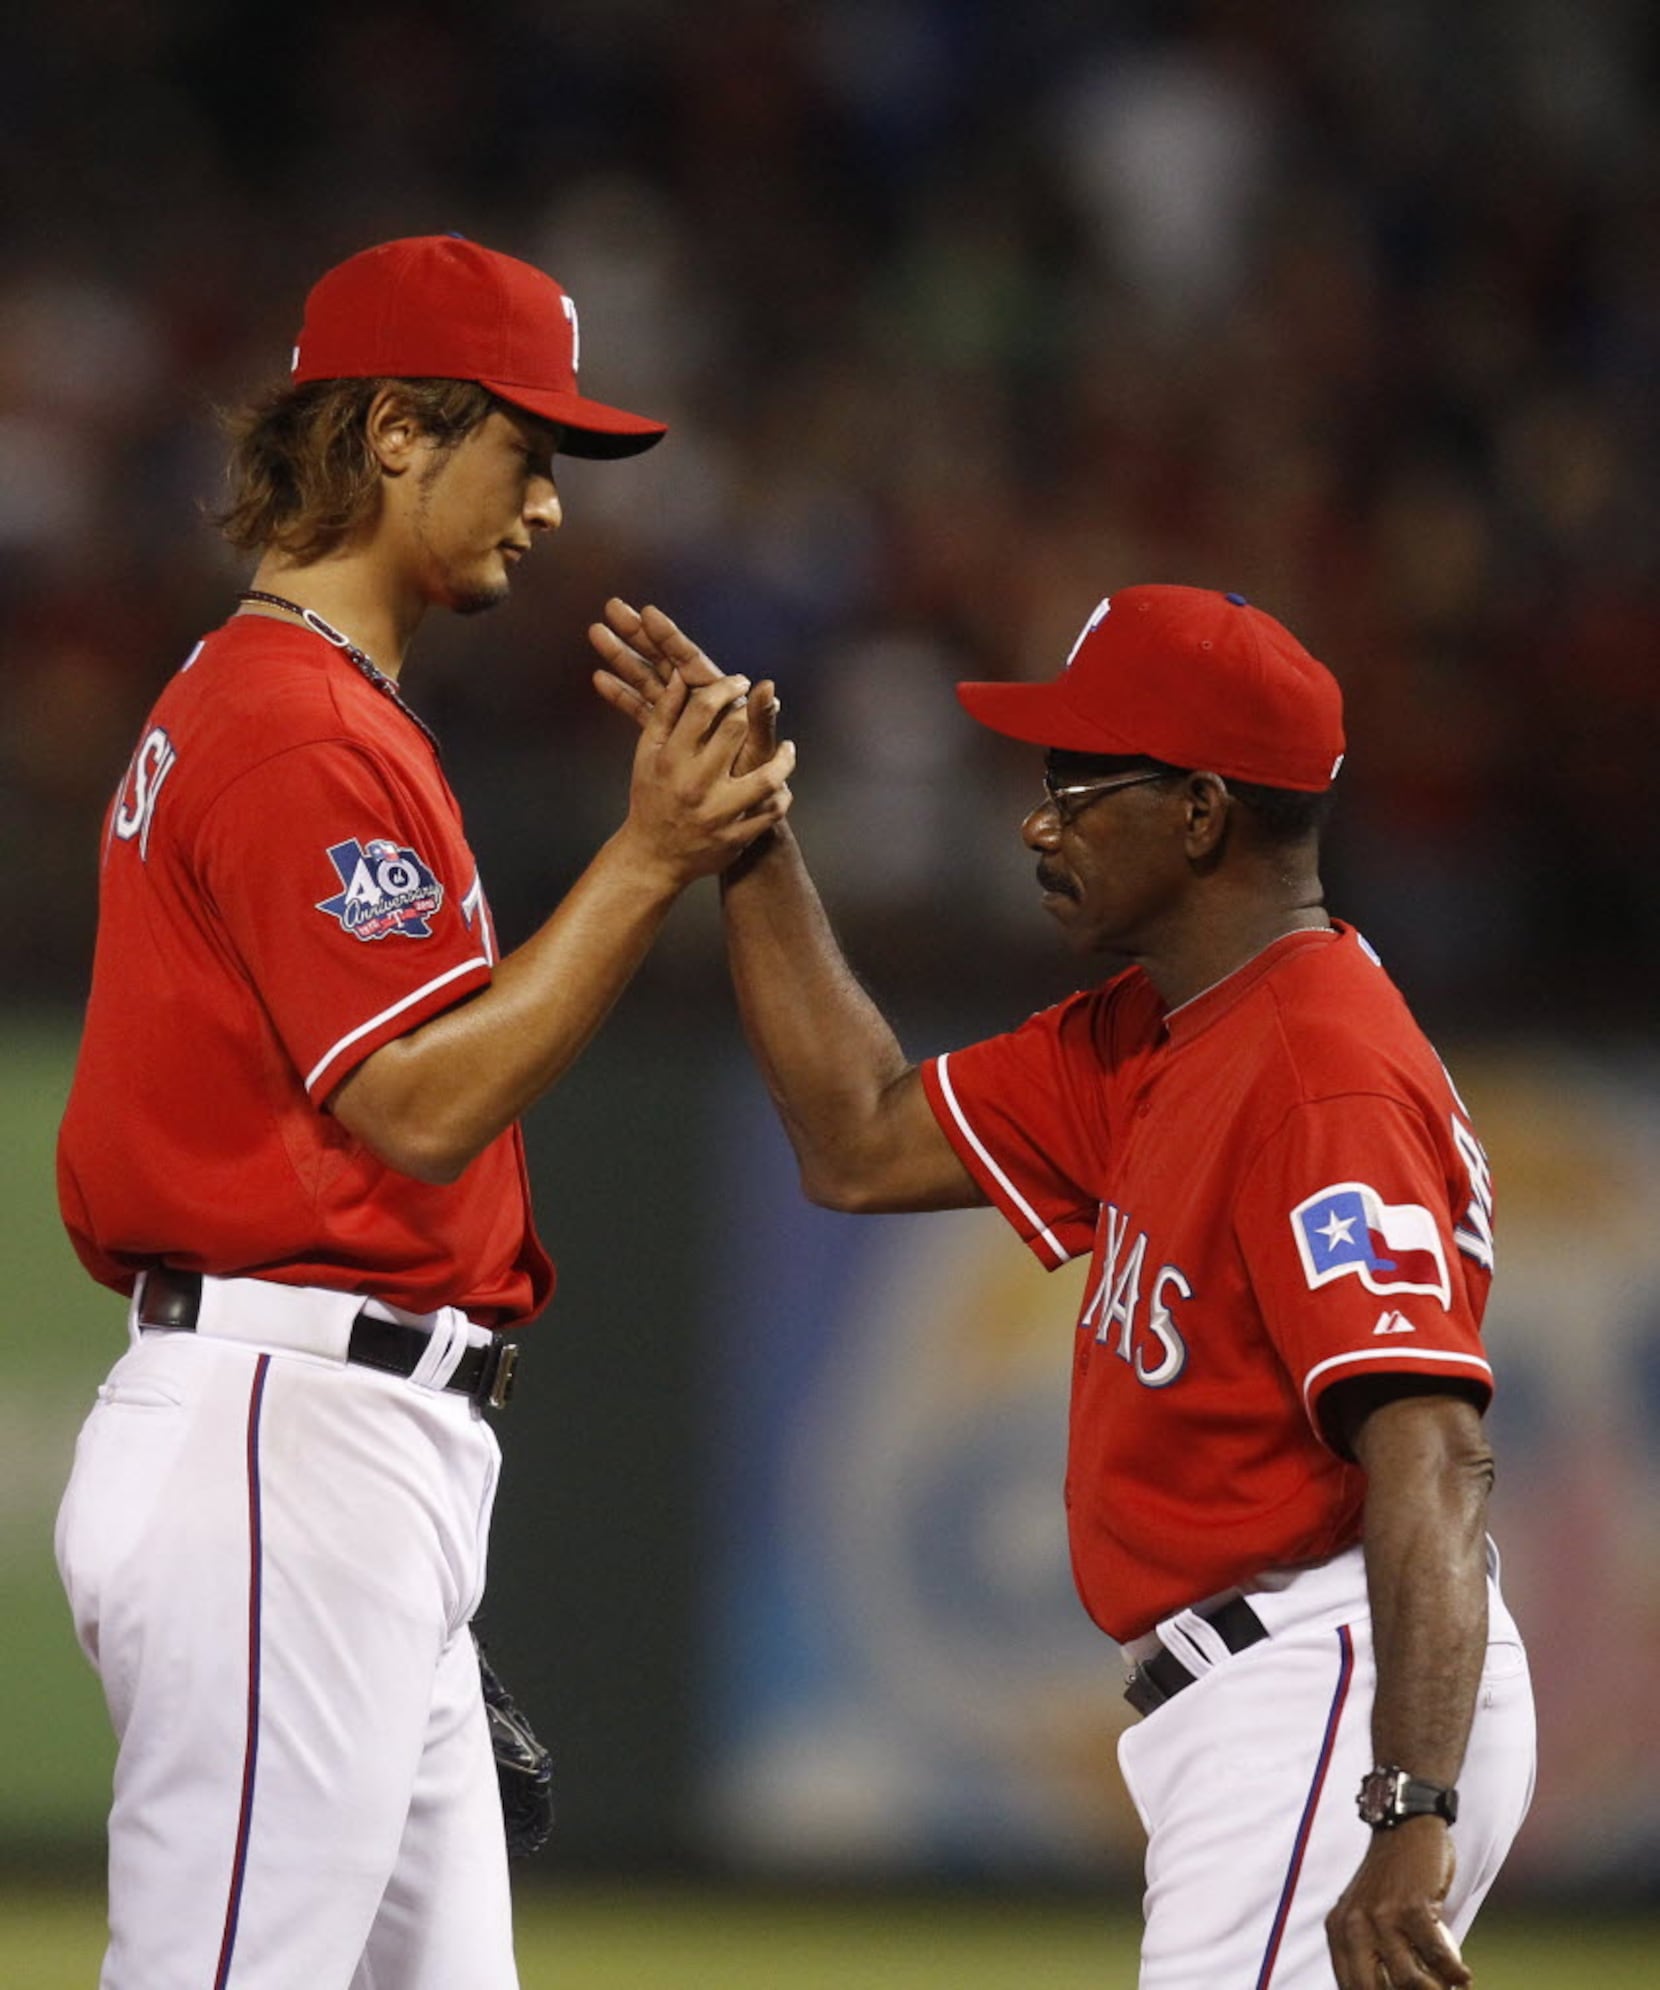 Fraley: When it comes to Yu Darvish, Rangers should proceed with